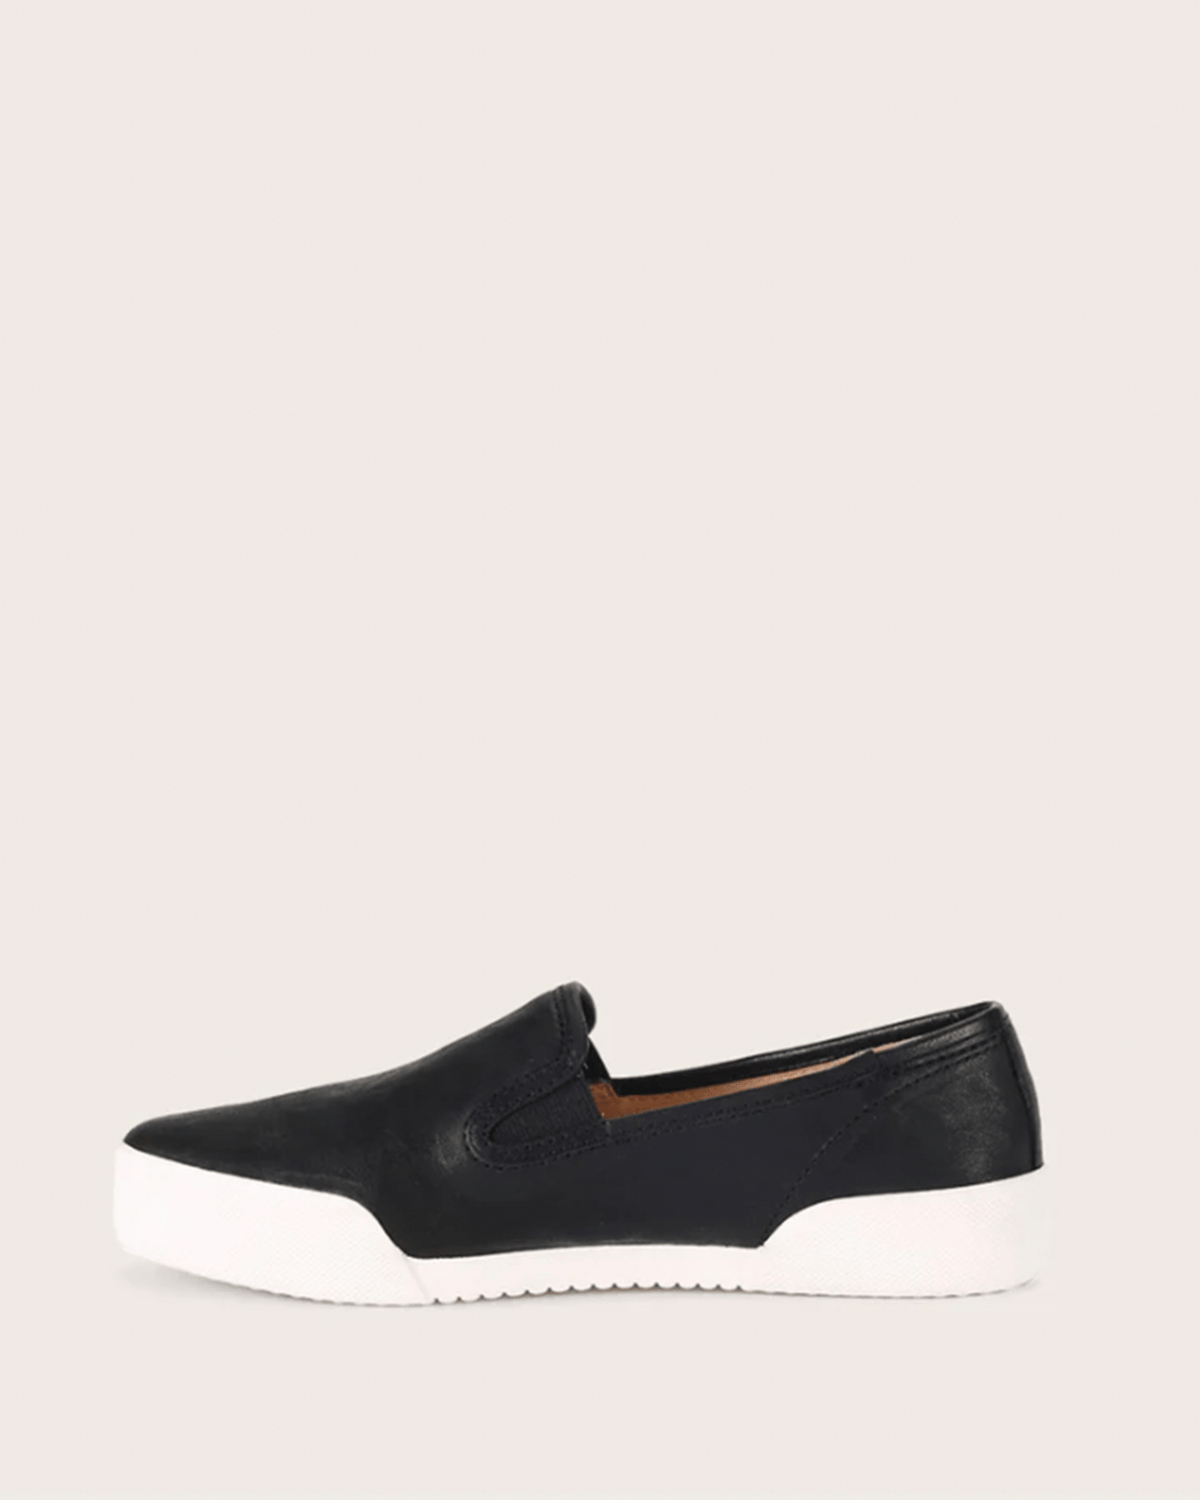 The Frye Company Shoes Mia Slip On in Black